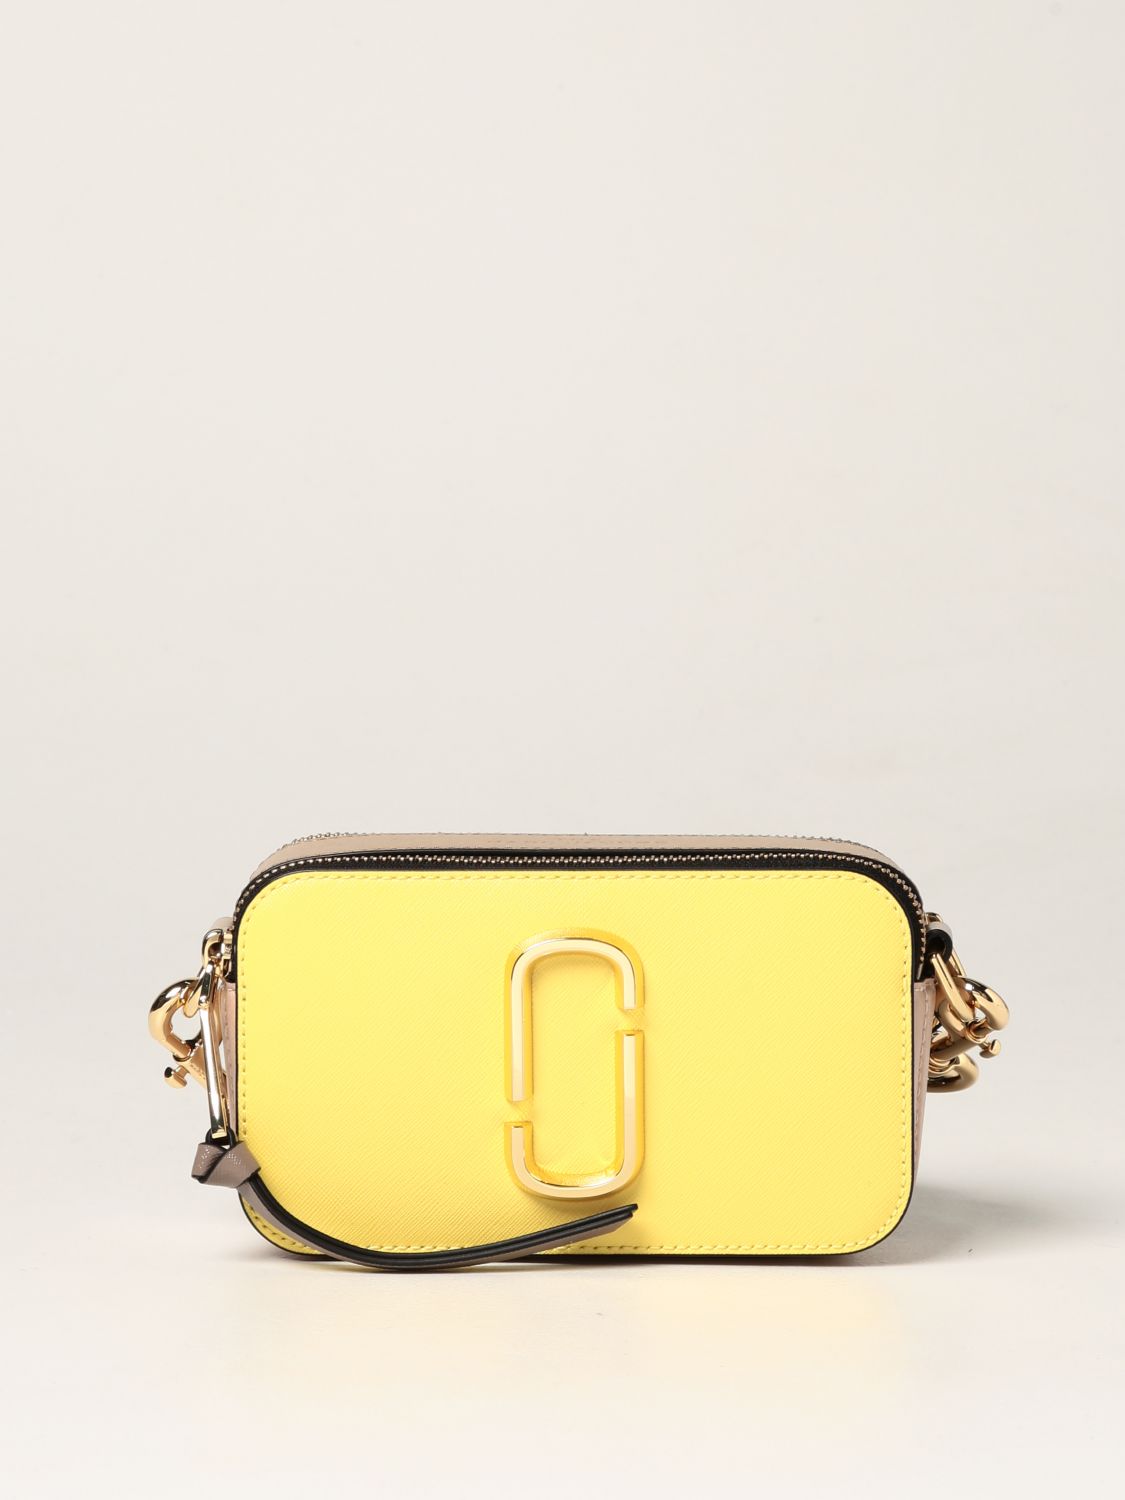 MARC JACOBS: The Snapshot Saffiano leather bag - Yellow | Marc Jacobs  crossbody bags M0012007 online at